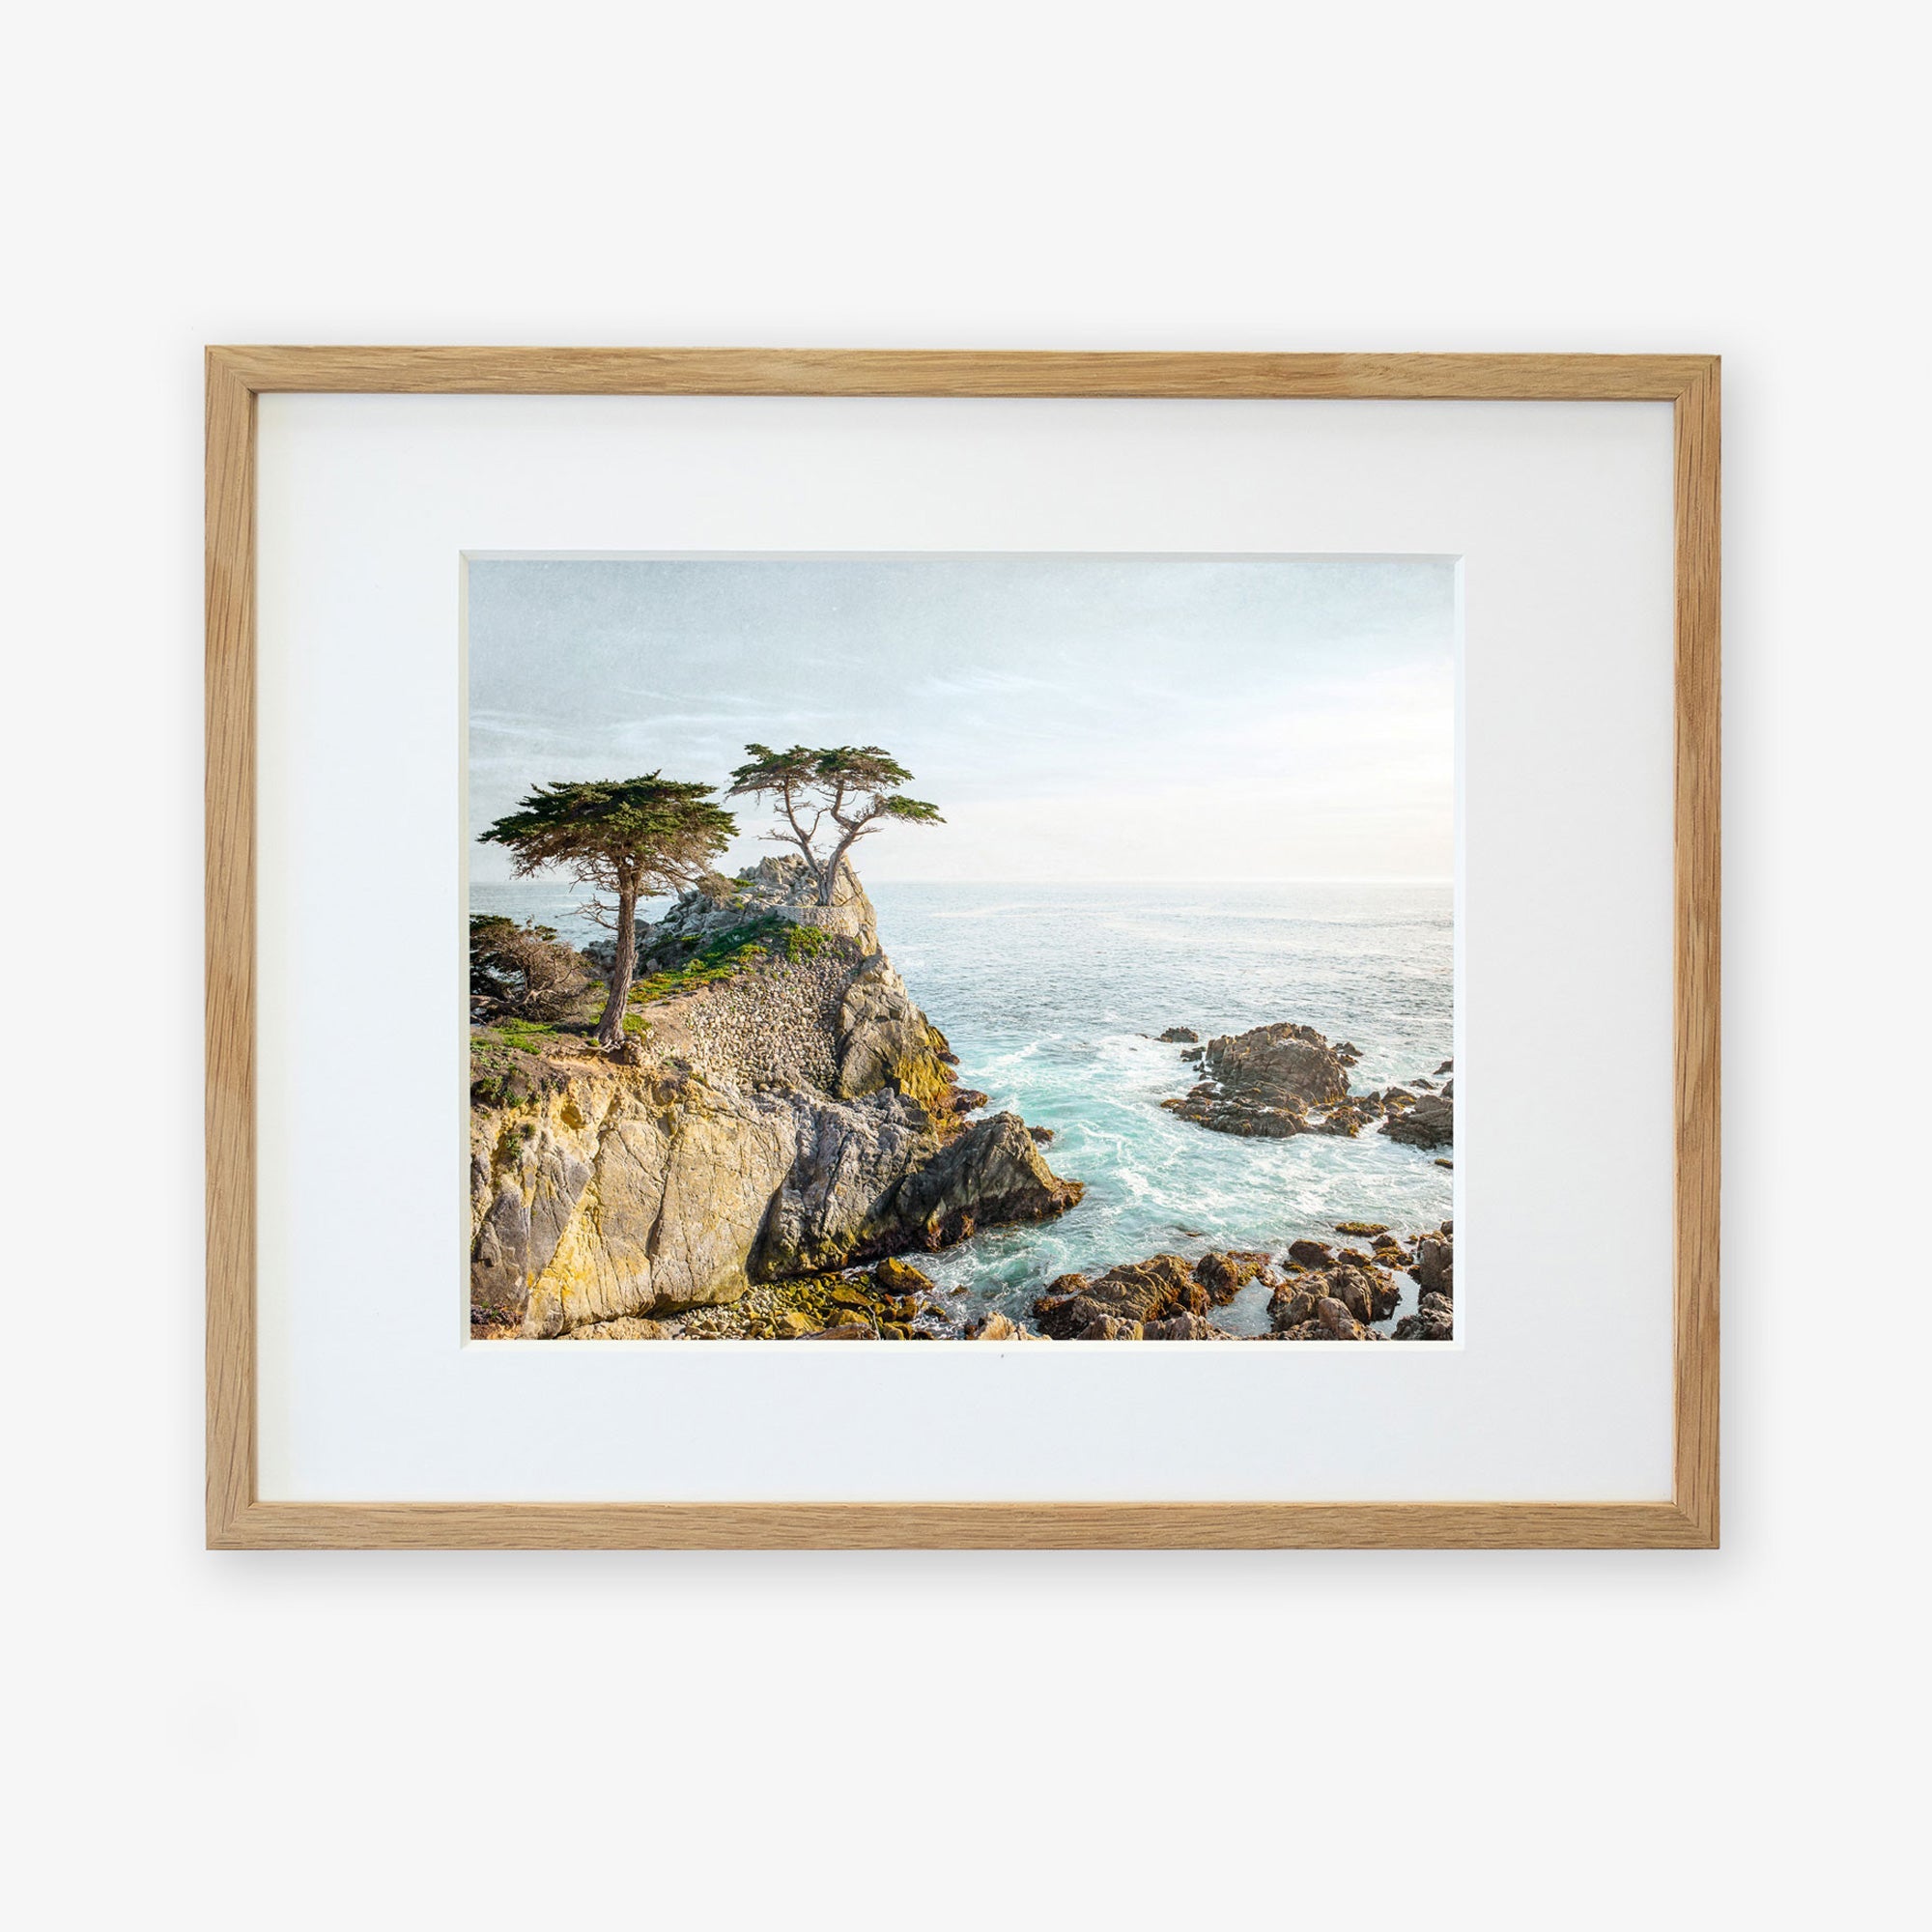 A framed California Coastal Print, &#39;Lone Cypress&#39; by Offley Green, depicting a rugged coastline with several trees atop a cliff overlooking the ocean at Pebble Beach, displayed against a plain white background.